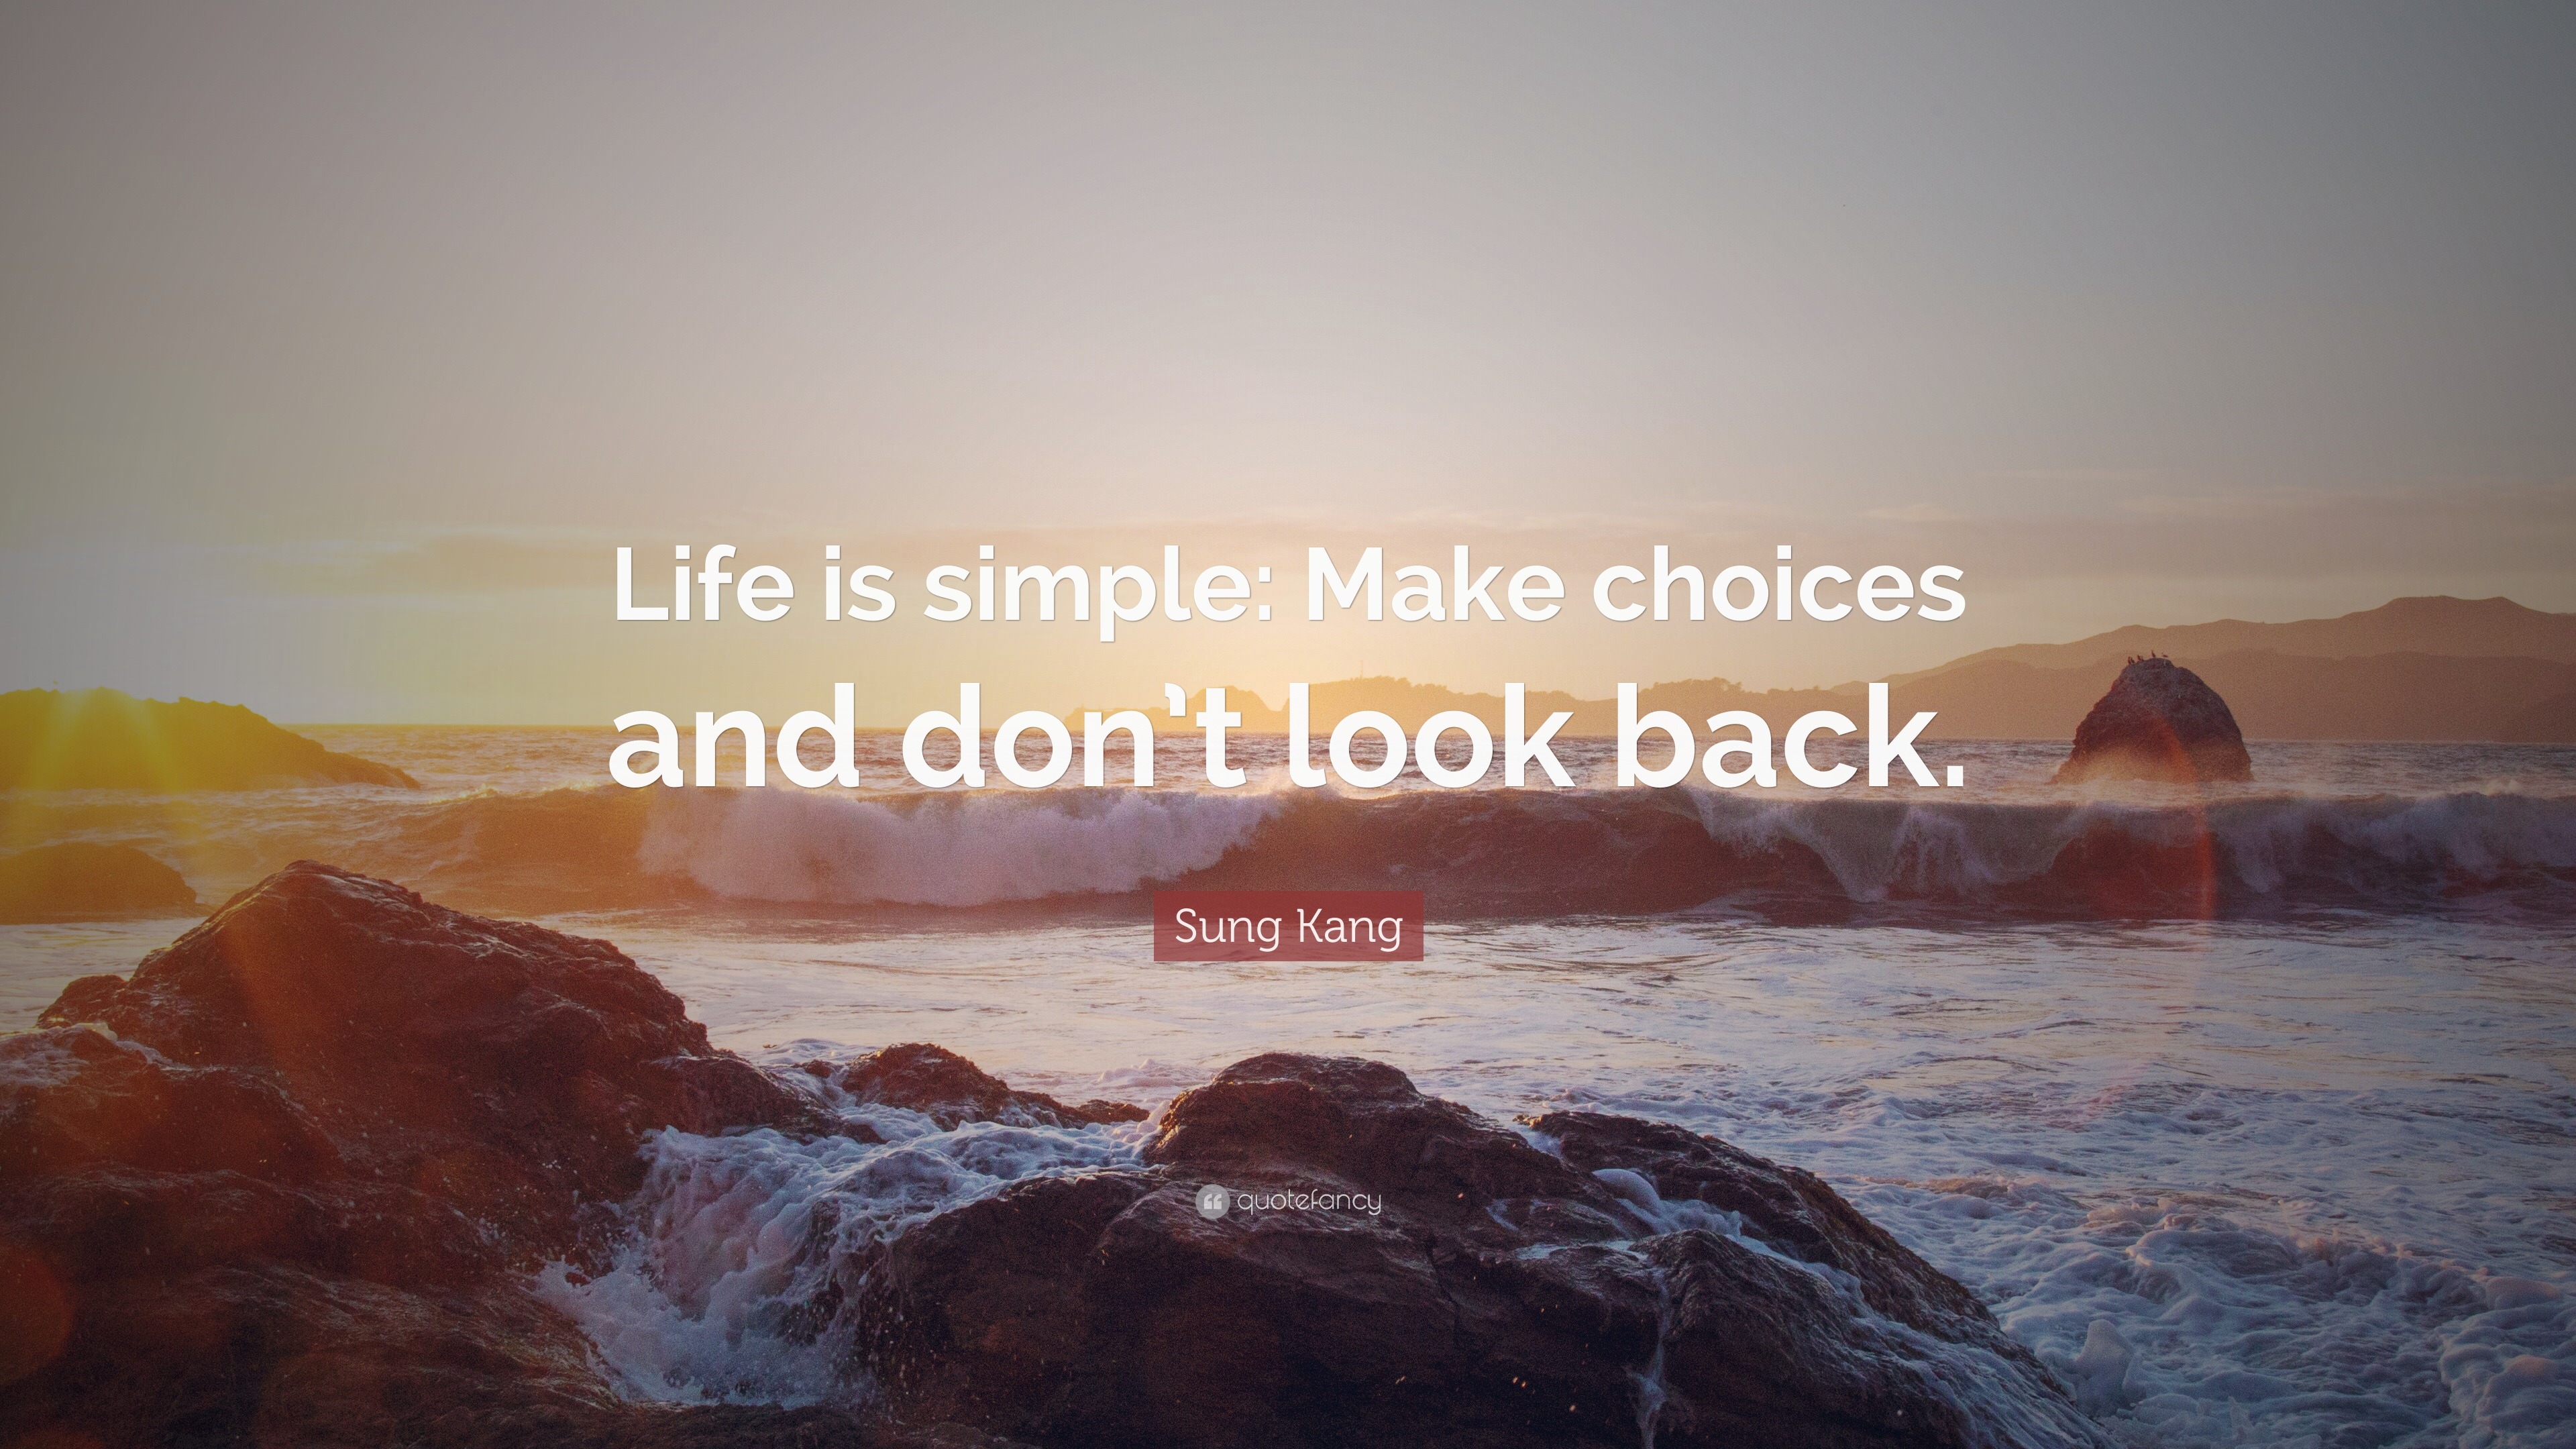 https://quotefancy.com/media/wallpaper/3840x2160/1761359-Sung-Kang-Quote-Life-is-simple-Make-choices-and-don-t-look-back.jpg